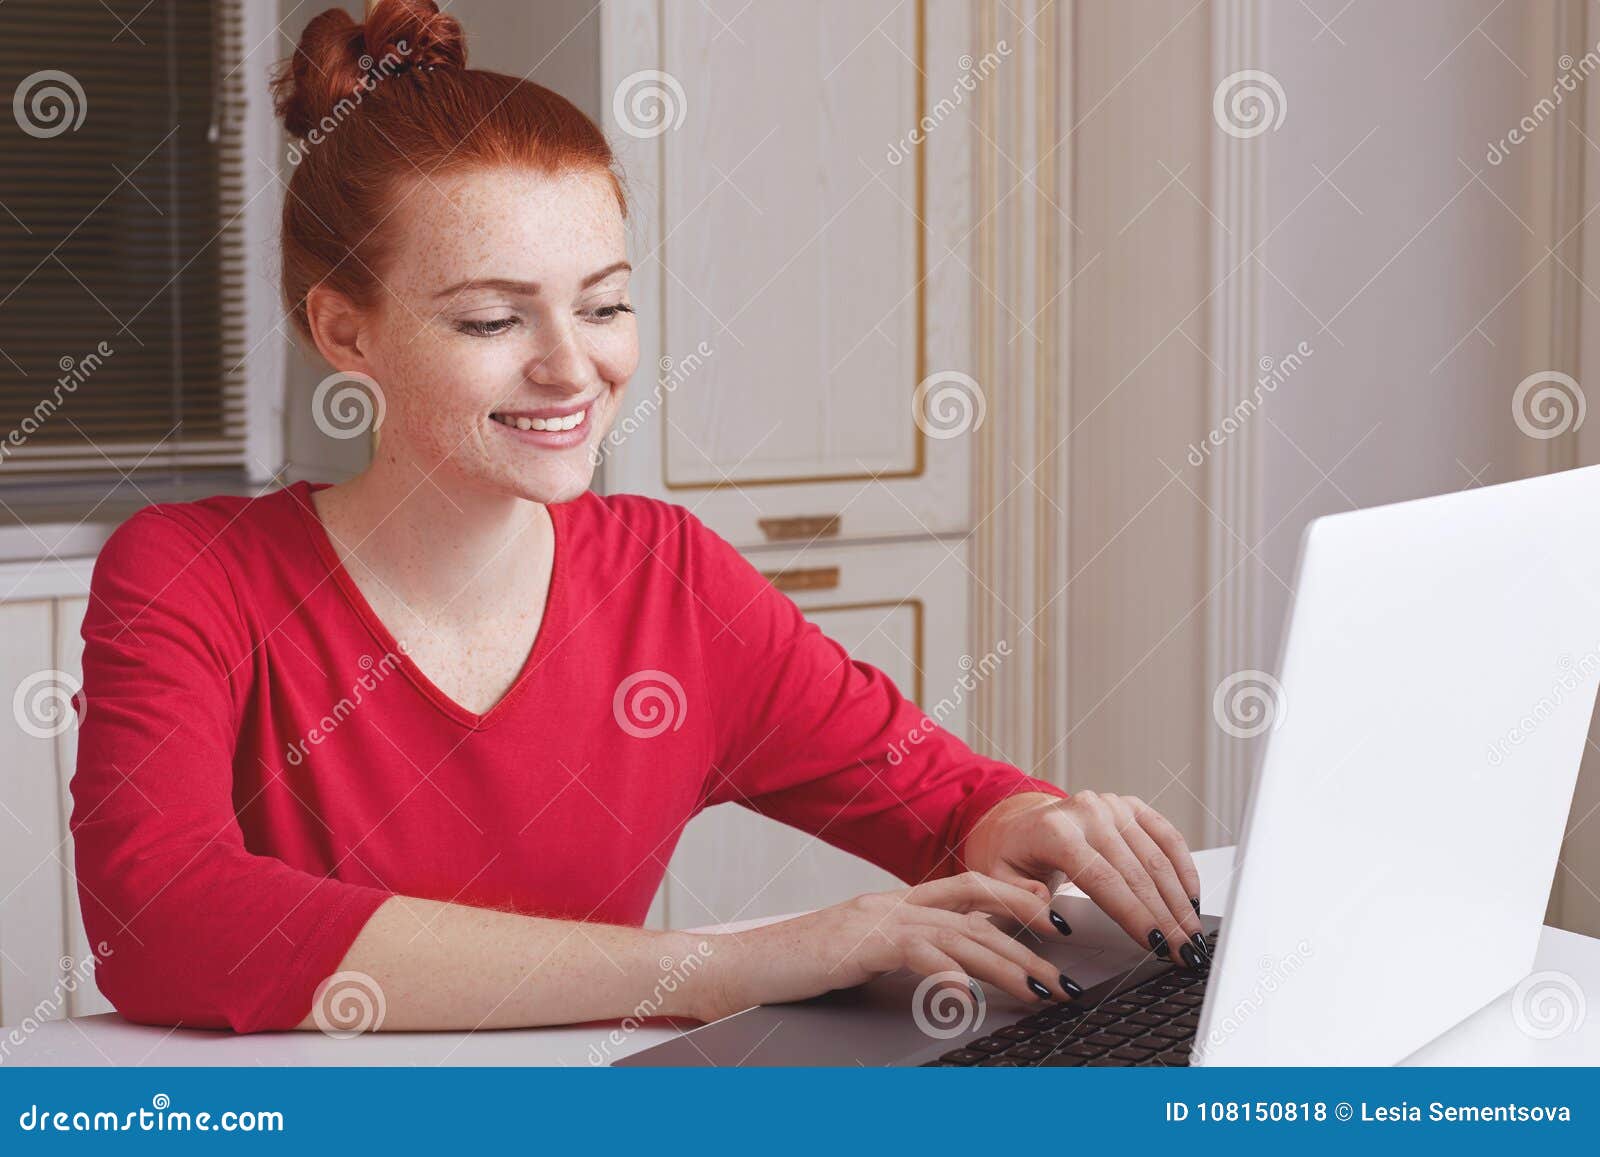 glad freckled female dressed in red sweater keyboards information on laptop computer, sits over kitchen interior, searches informa